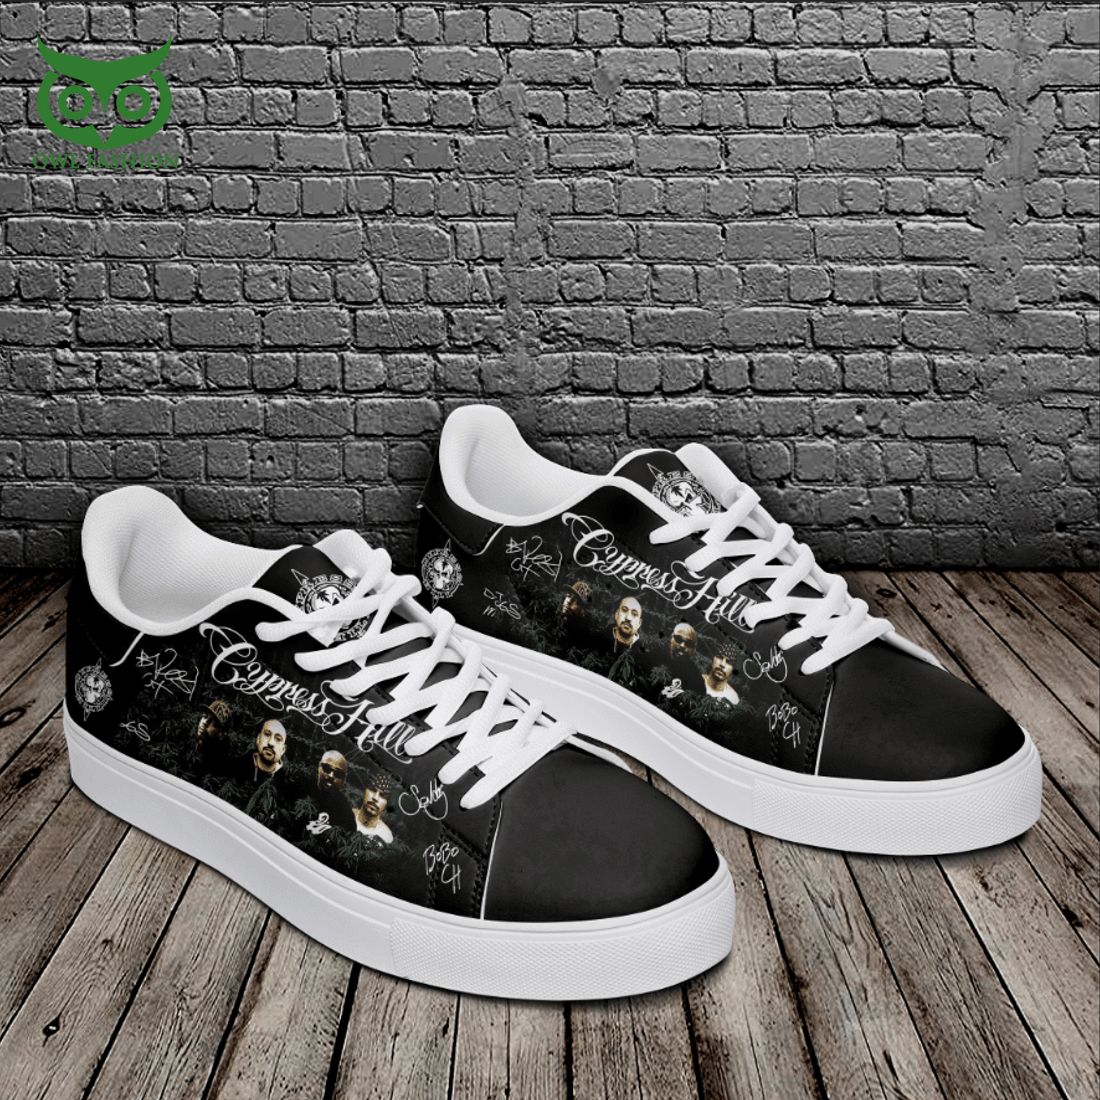 cypress hill group member 3d printed stan smith shoes 2 BGk4y